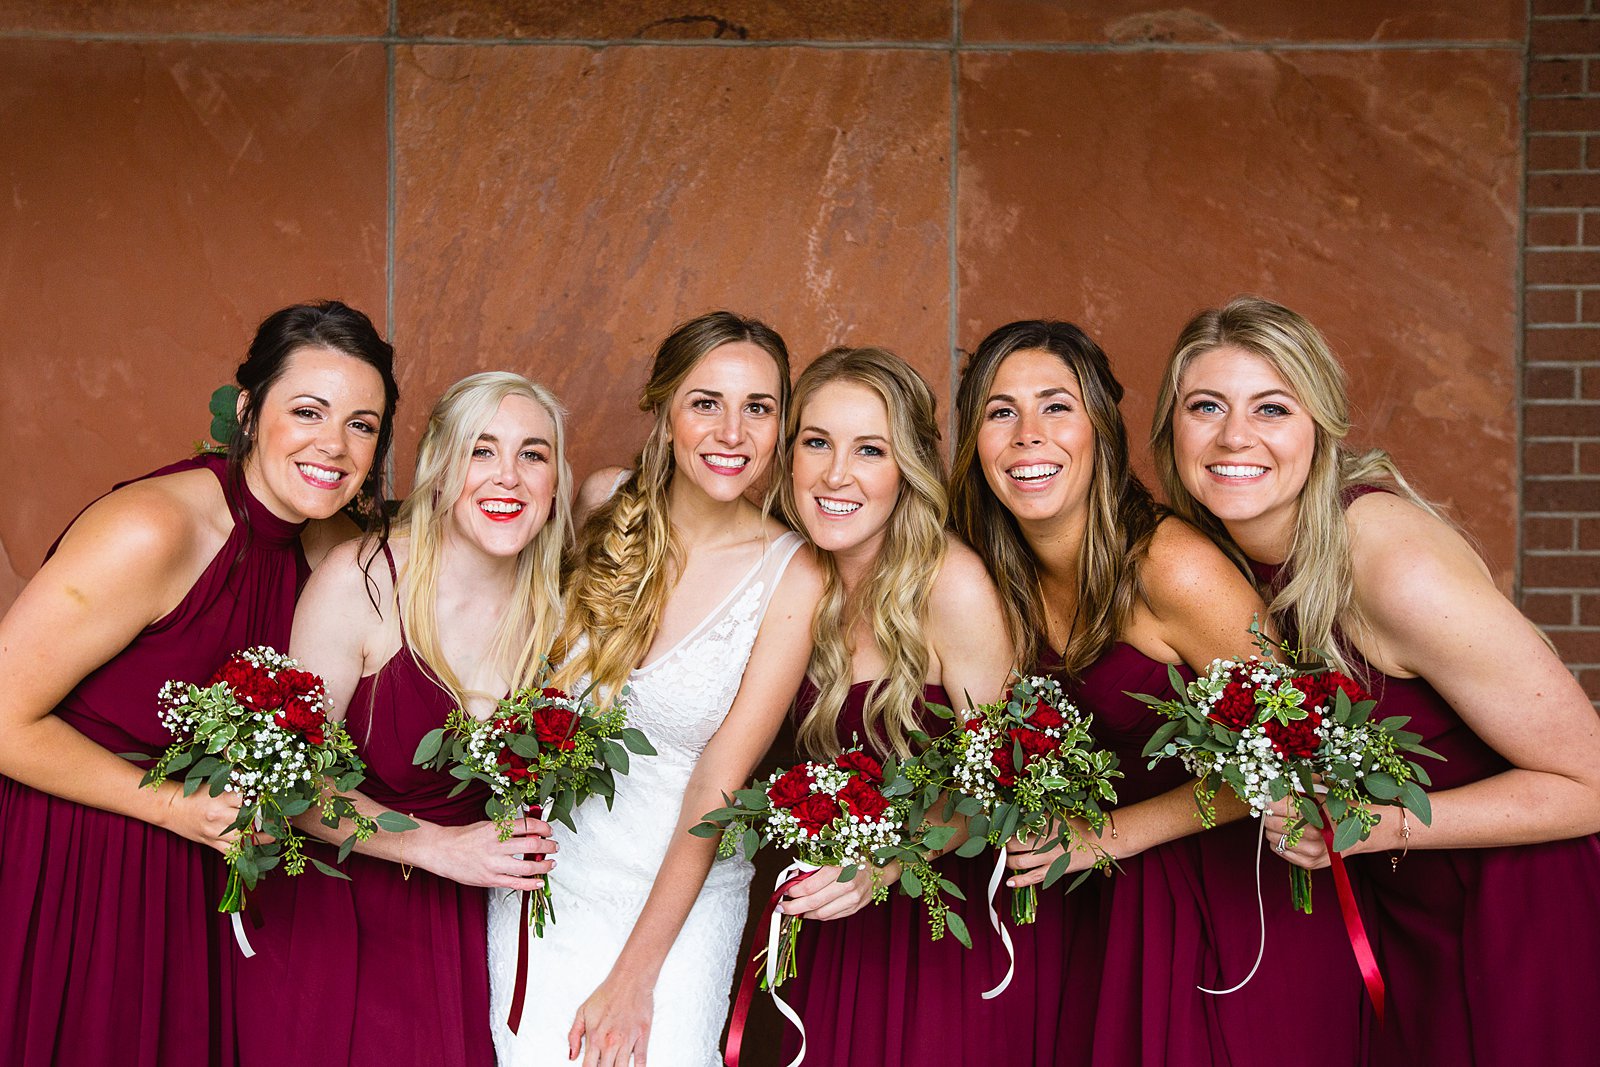 Bride and bridesmaids together at a downtown Flagstaff wedding by Arizona wedding photographer PMA Photography.